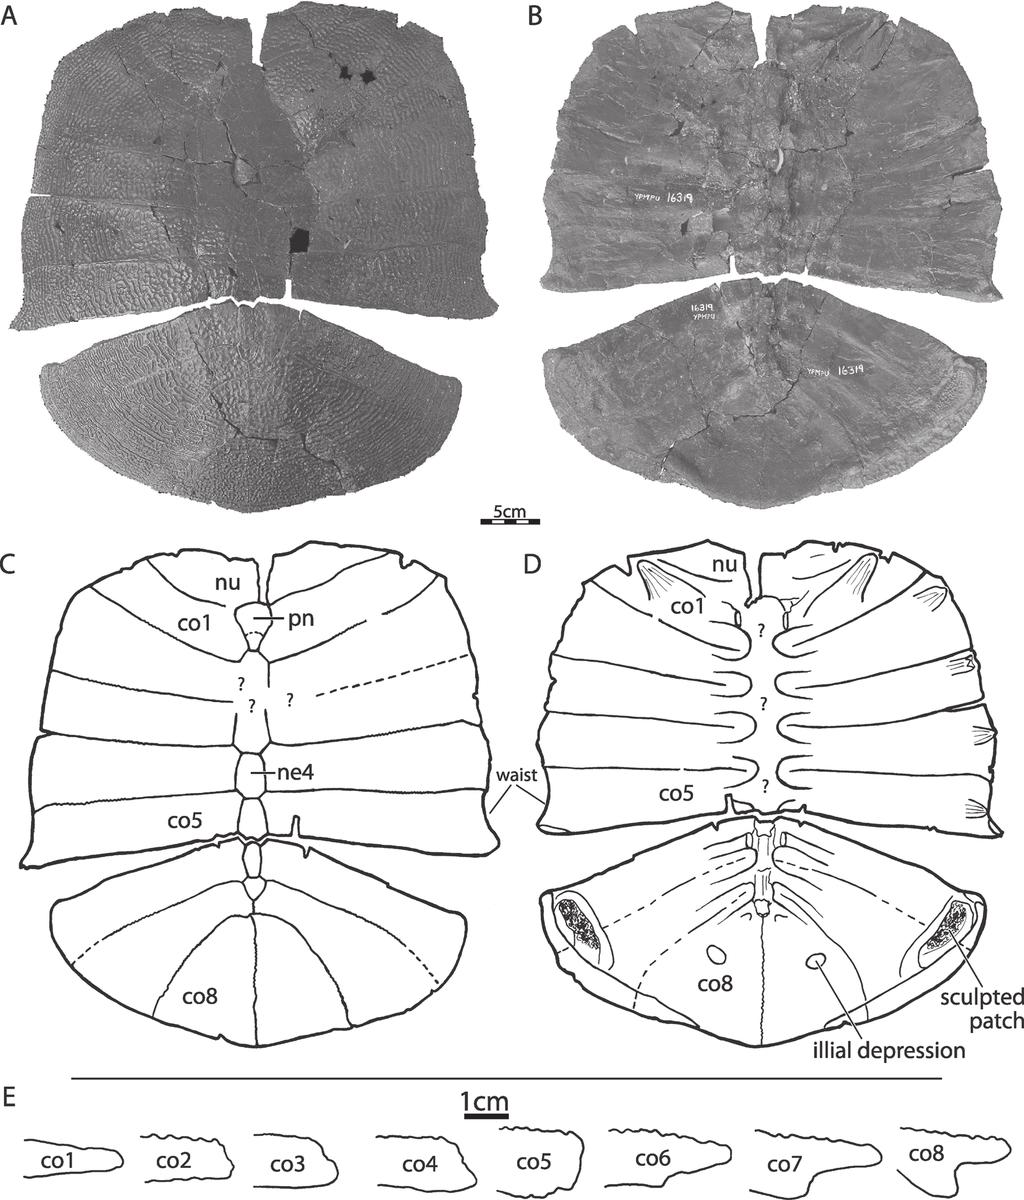 316 Bulletin of the Peabody Museum of Natural History 50(2) October 2009 Figure 5. YPM PU 16319, holotype of Hutchemys arctochelys sp. nov. A. Dorsal view of carapace. B. Ventral view of carapace. C.